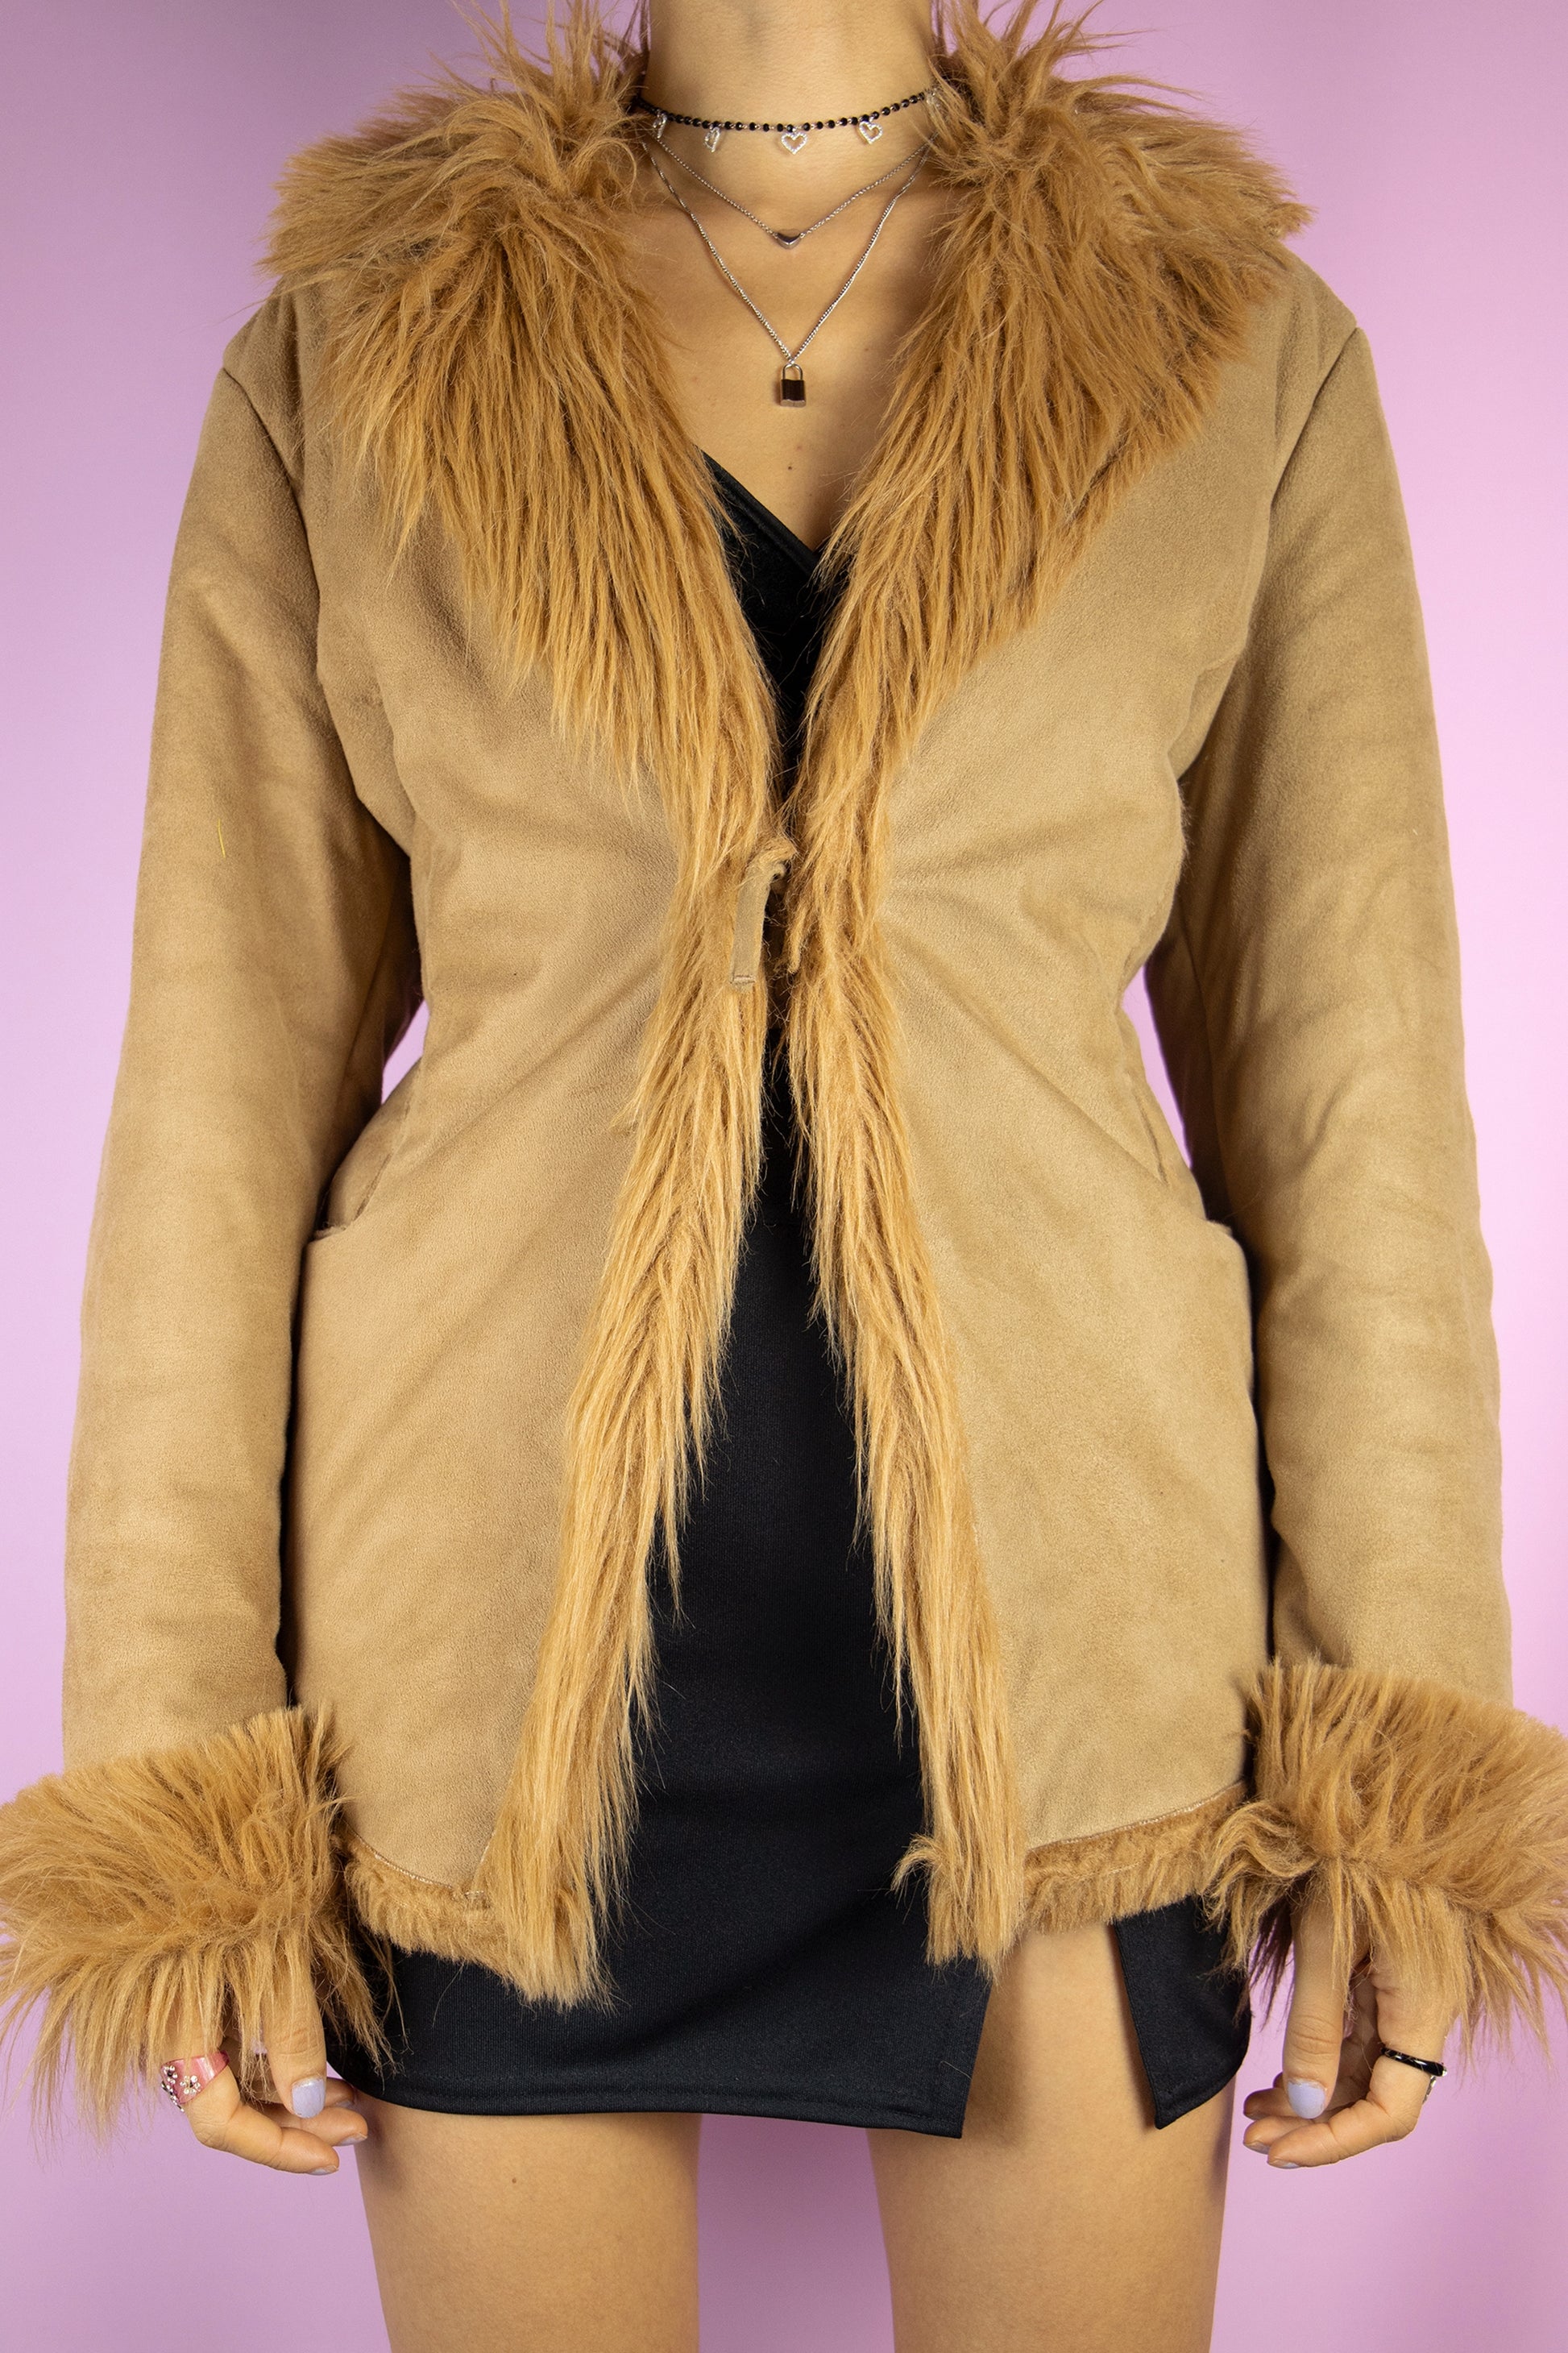 The Y2K Penny Lane Style Jacket is a vintage brown jacket with faux fur lining, collar and cuffs, it also has pockets and ties in the front. Iconic afghan style 2000s winter statement coat.